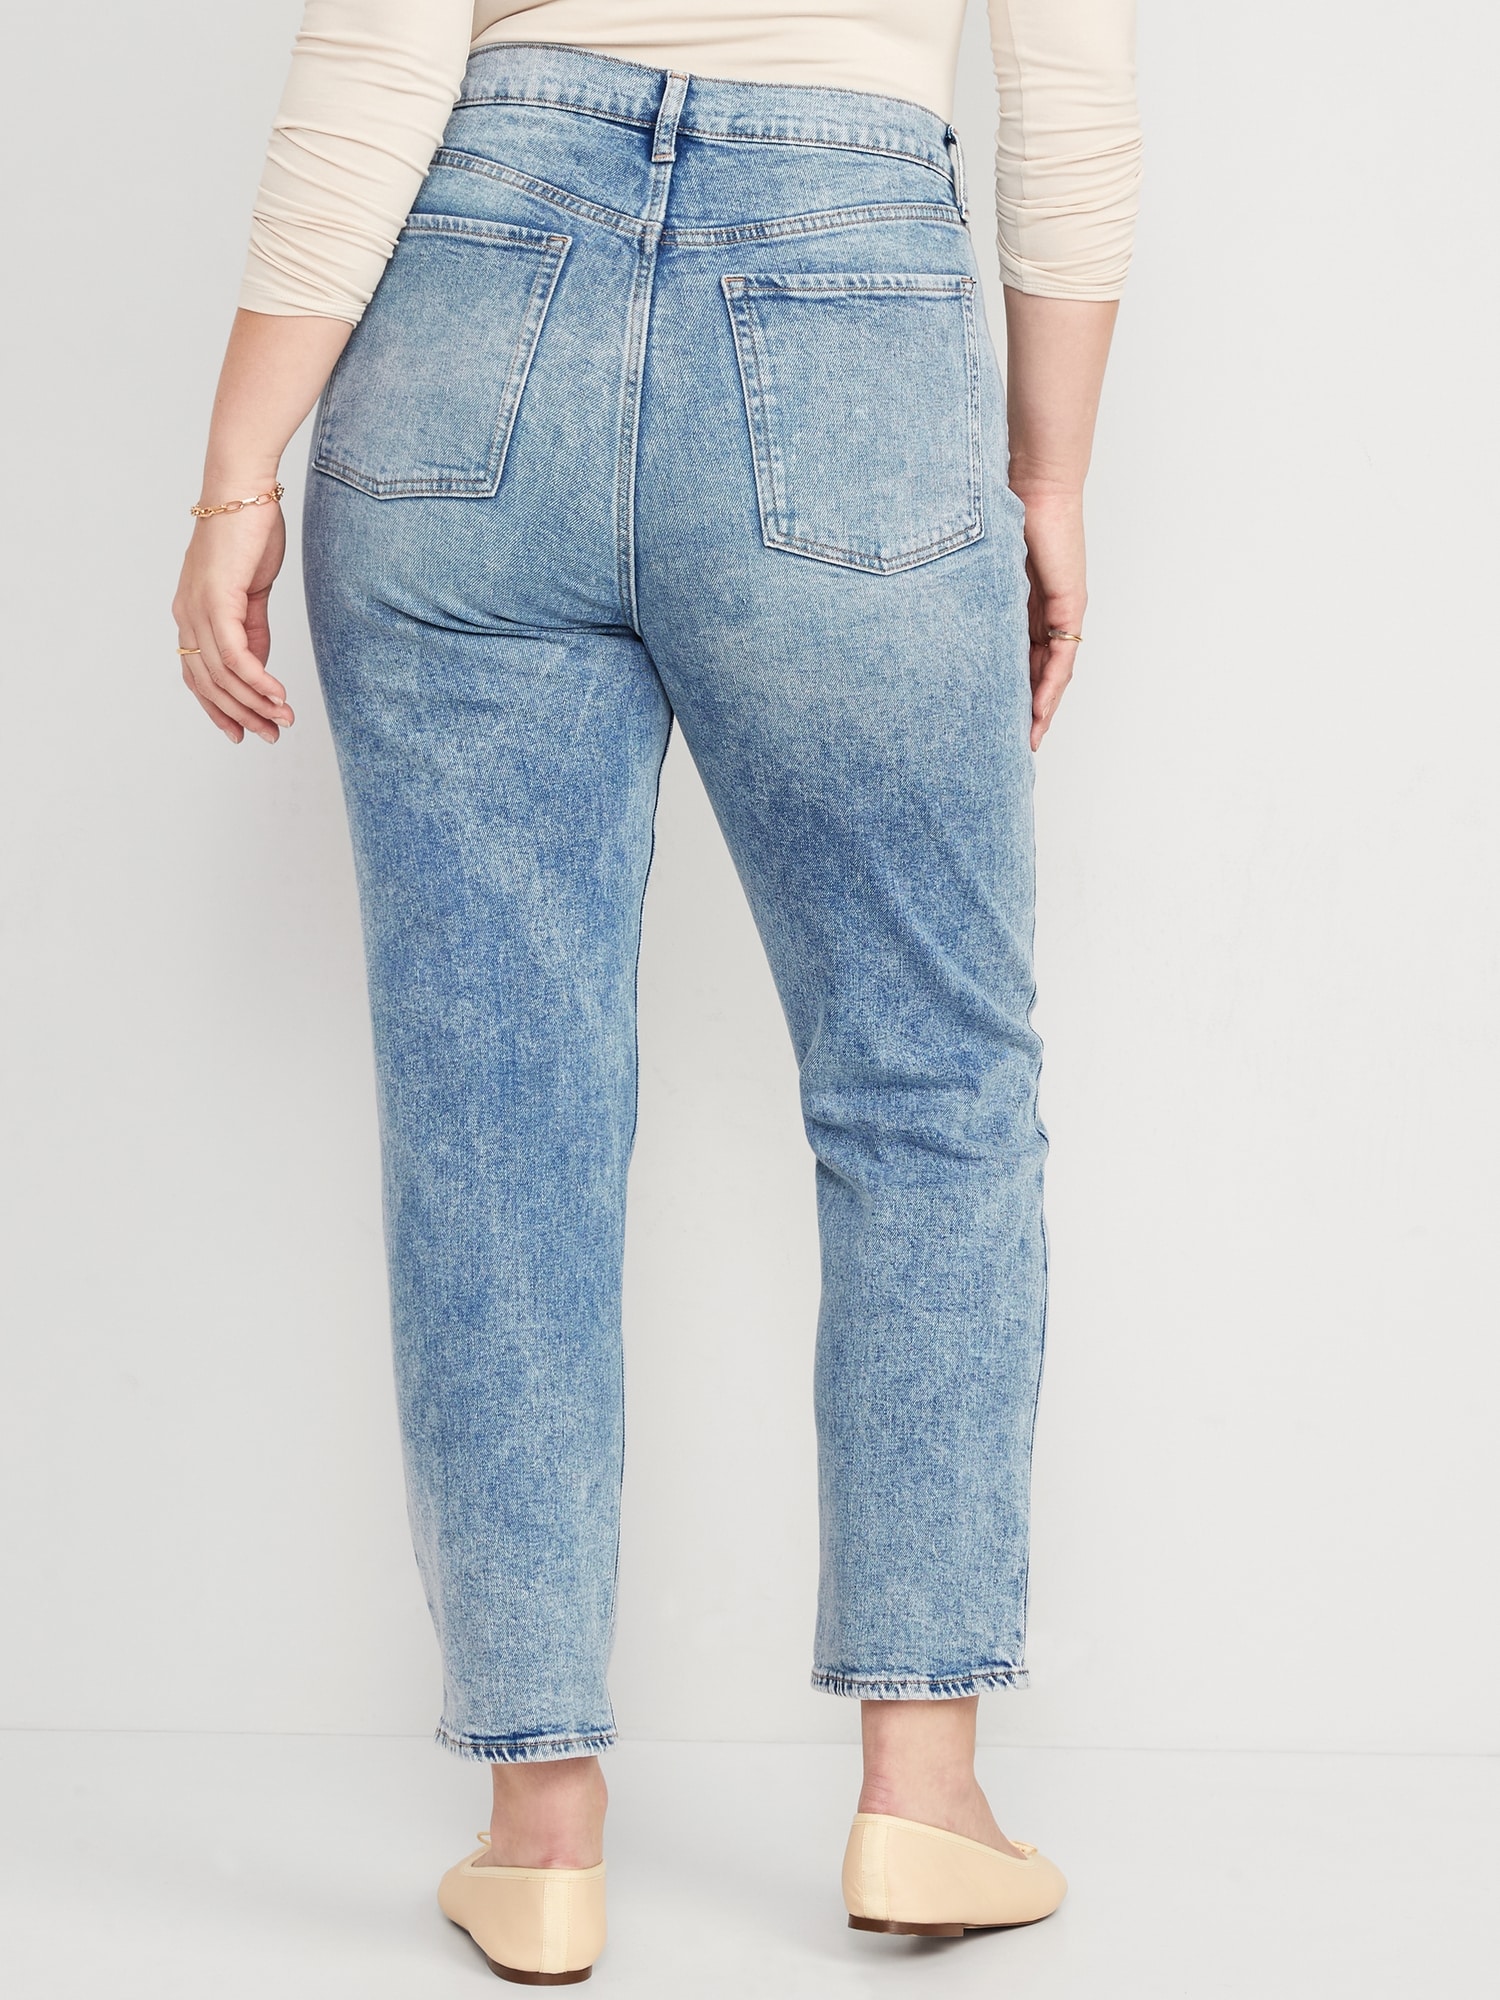 Extra High-Waisted Button-Fly Sky-Hi Straight Ripped Jeans for